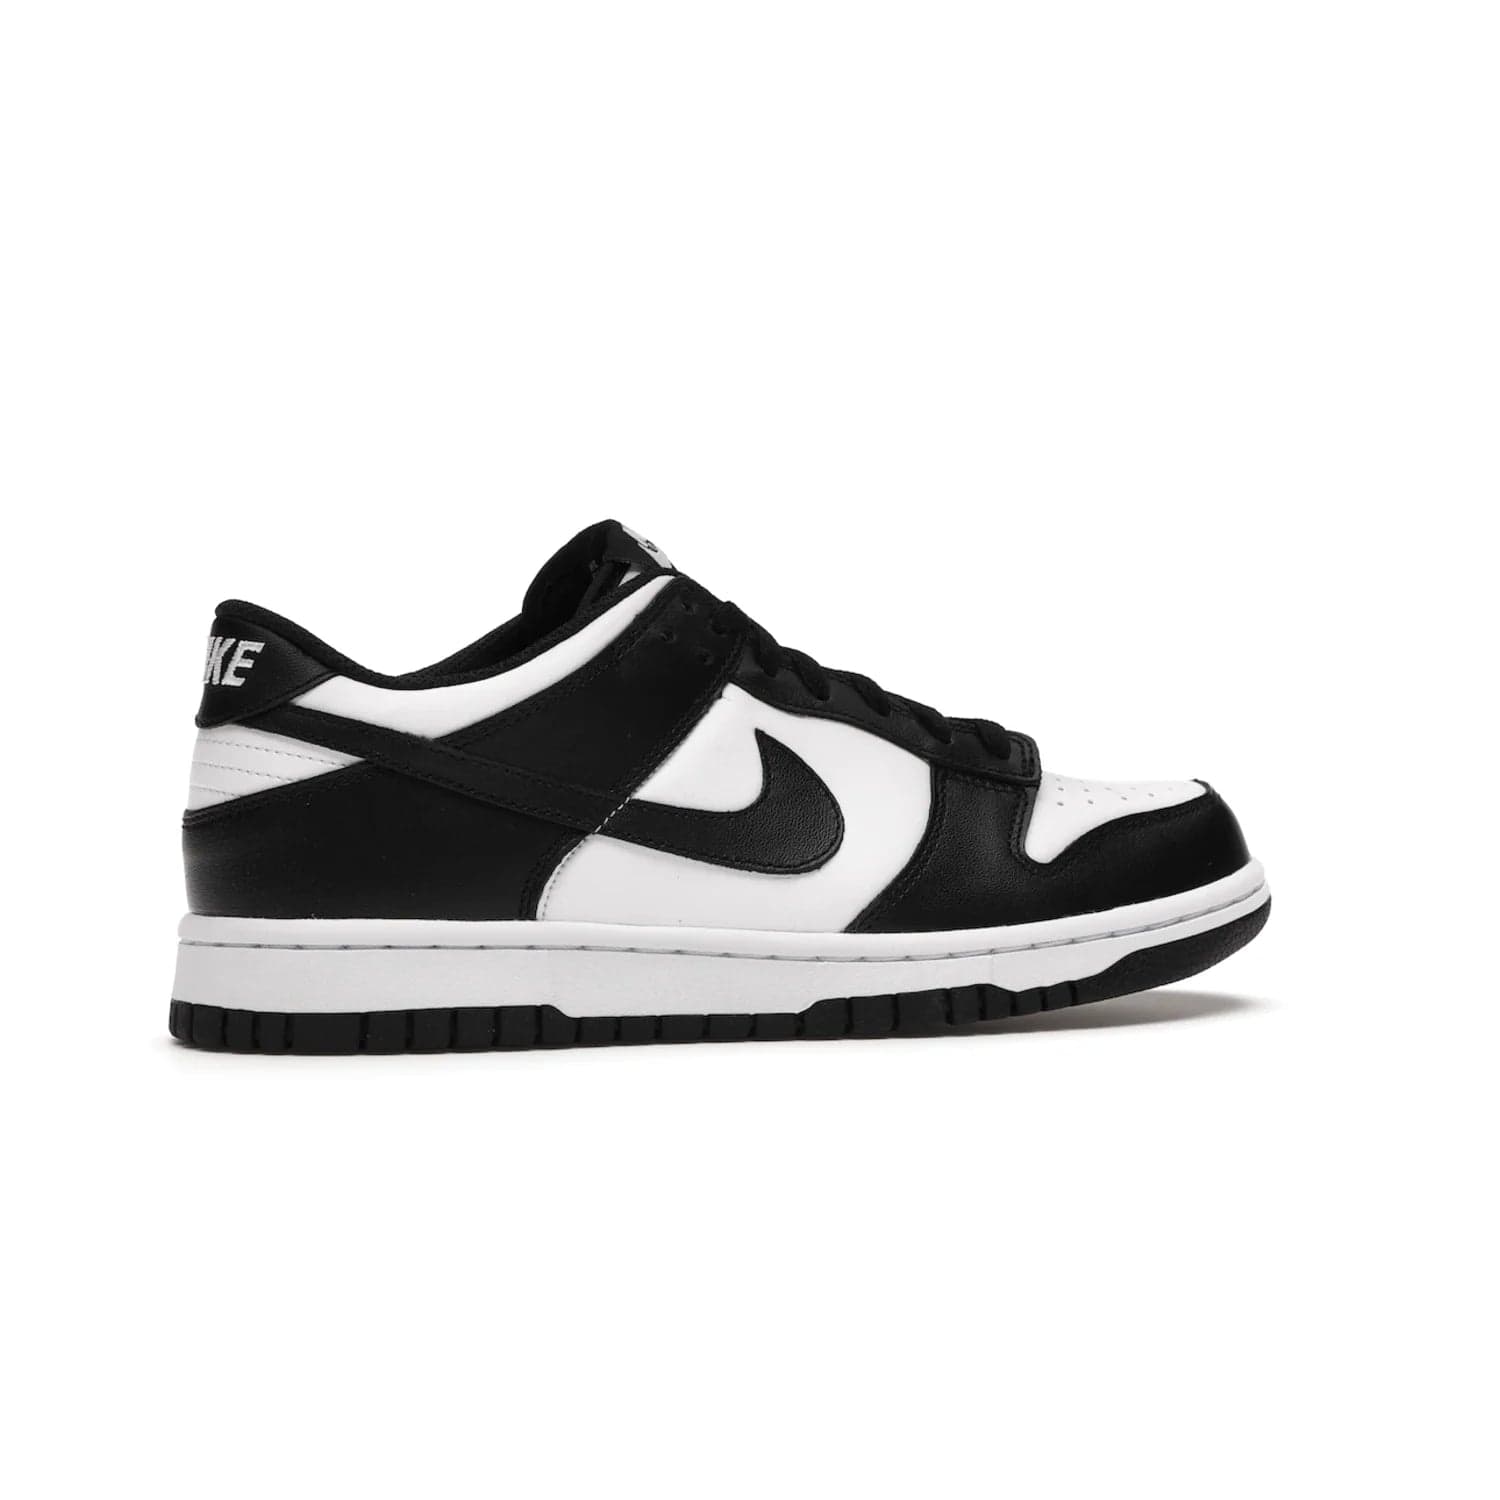 Nike Dunk Low Retro White Black Panda (2021) (GS) - Image 35 - Only at www.BallersClubKickz.com - Upgrade your style with the Nike Dunk Low Retro White Black (GS). Featuring premium leather, iconic Nike text, signature Swoosh logo and striking black/white colorway, this striking silhouette is the perfect mix of style and comfort. Colorway released in March 2021.